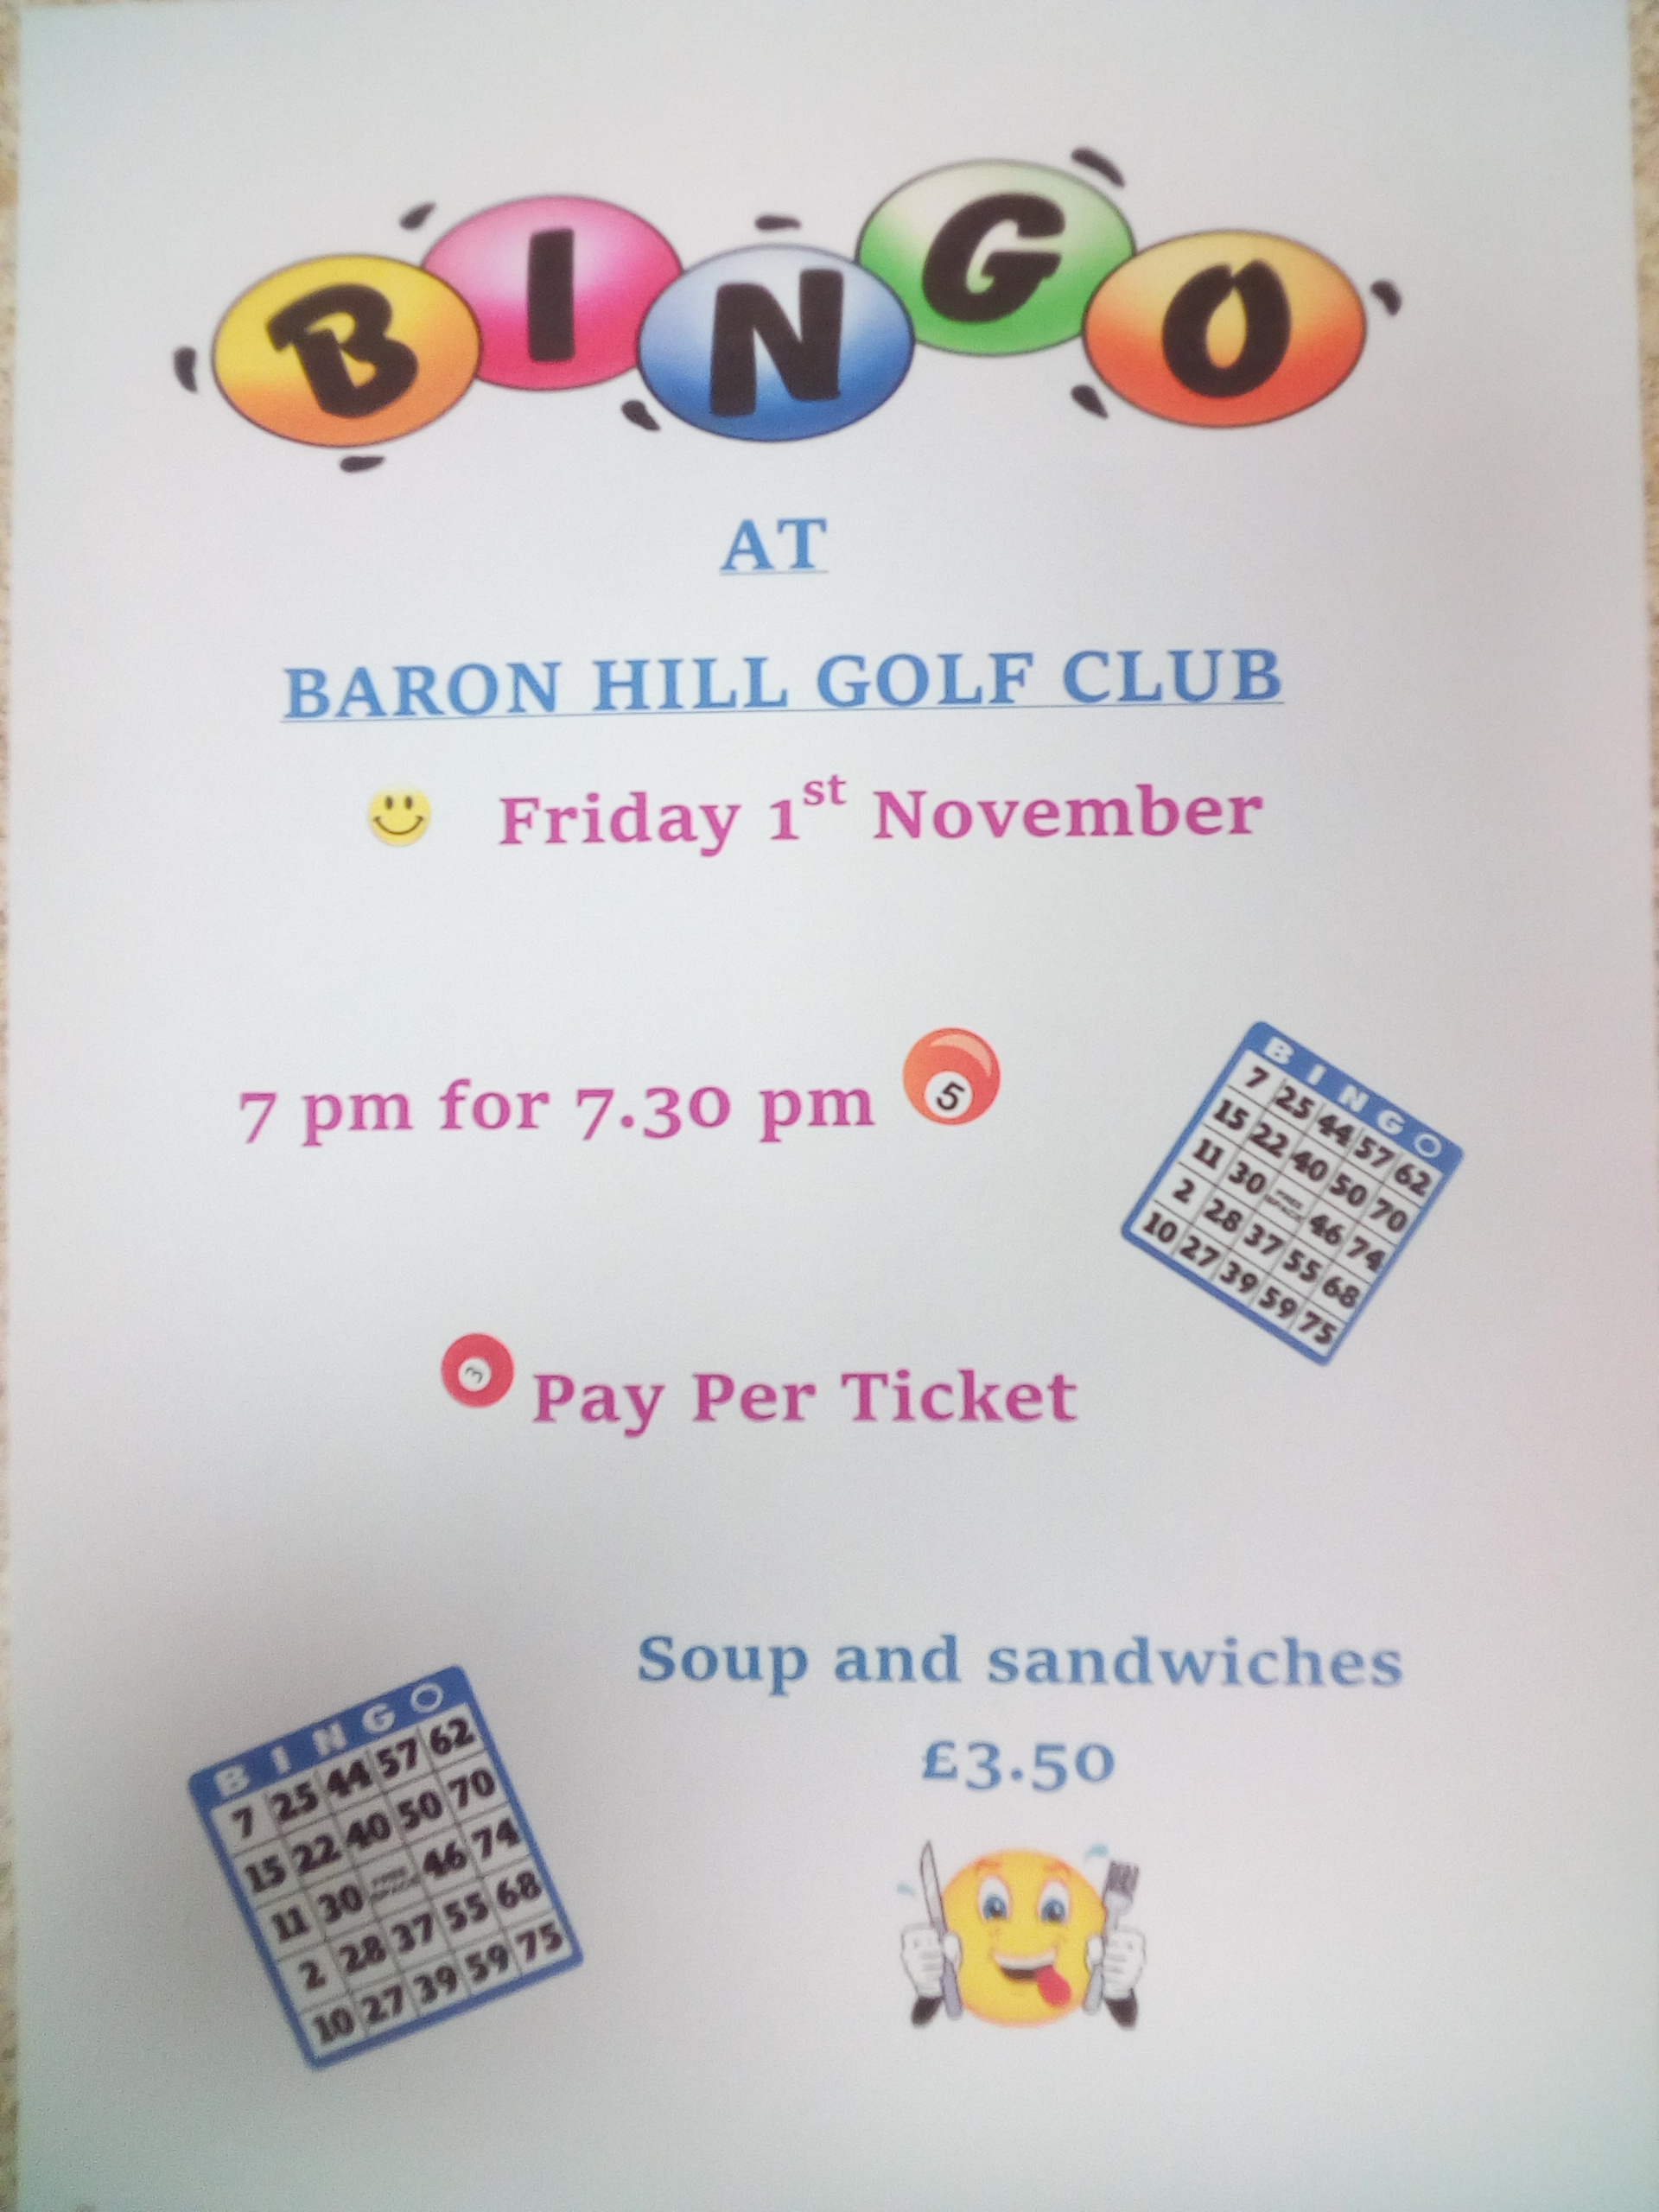 Join us on Friday 1st November 2019 for a night of bingo